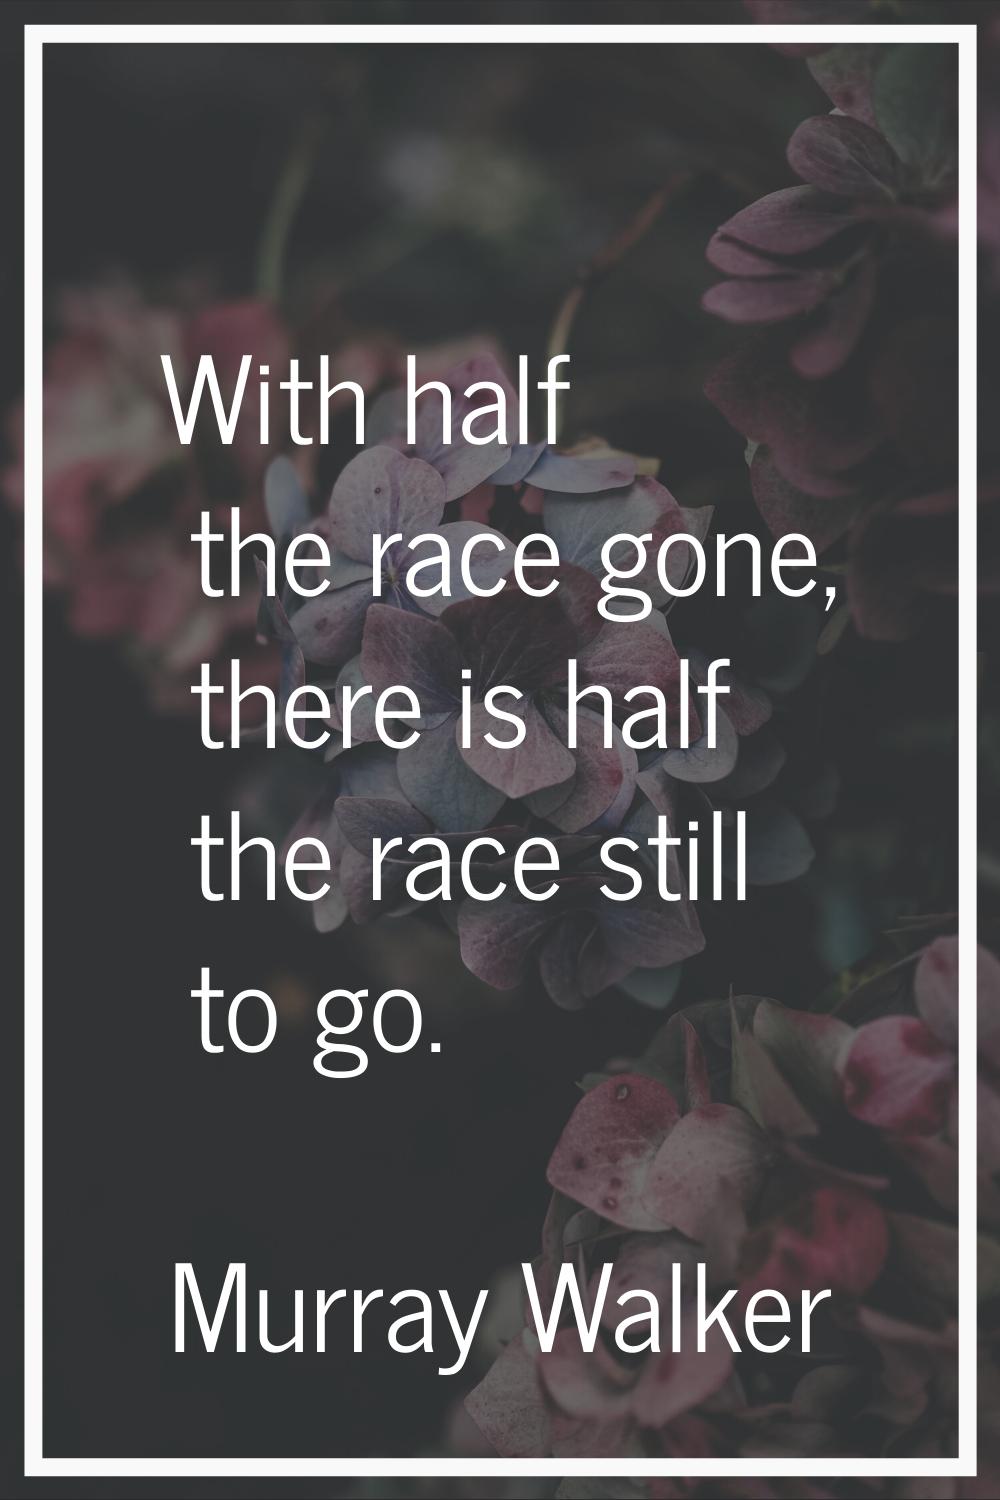 With half the race gone, there is half the race still to go.